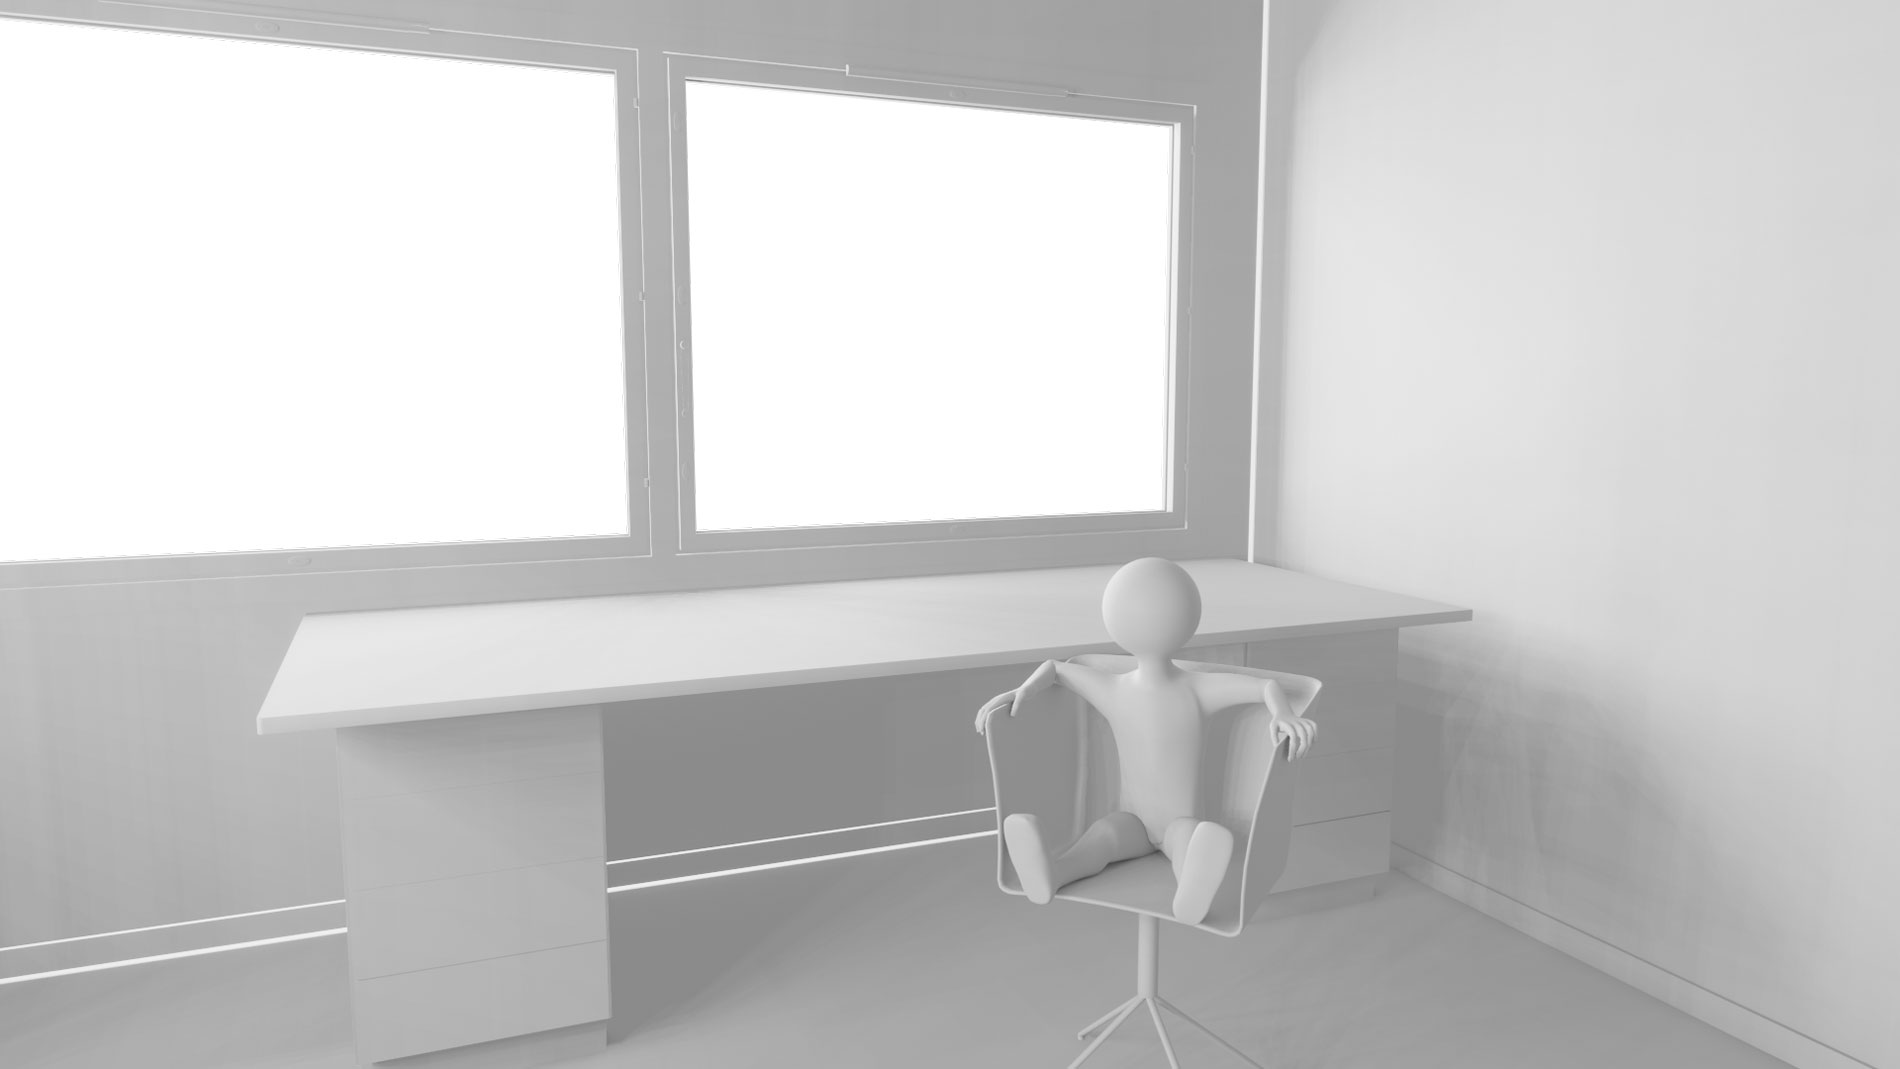 A scene from Deep Address: a human-like avatar sitting on a chair in a white room.